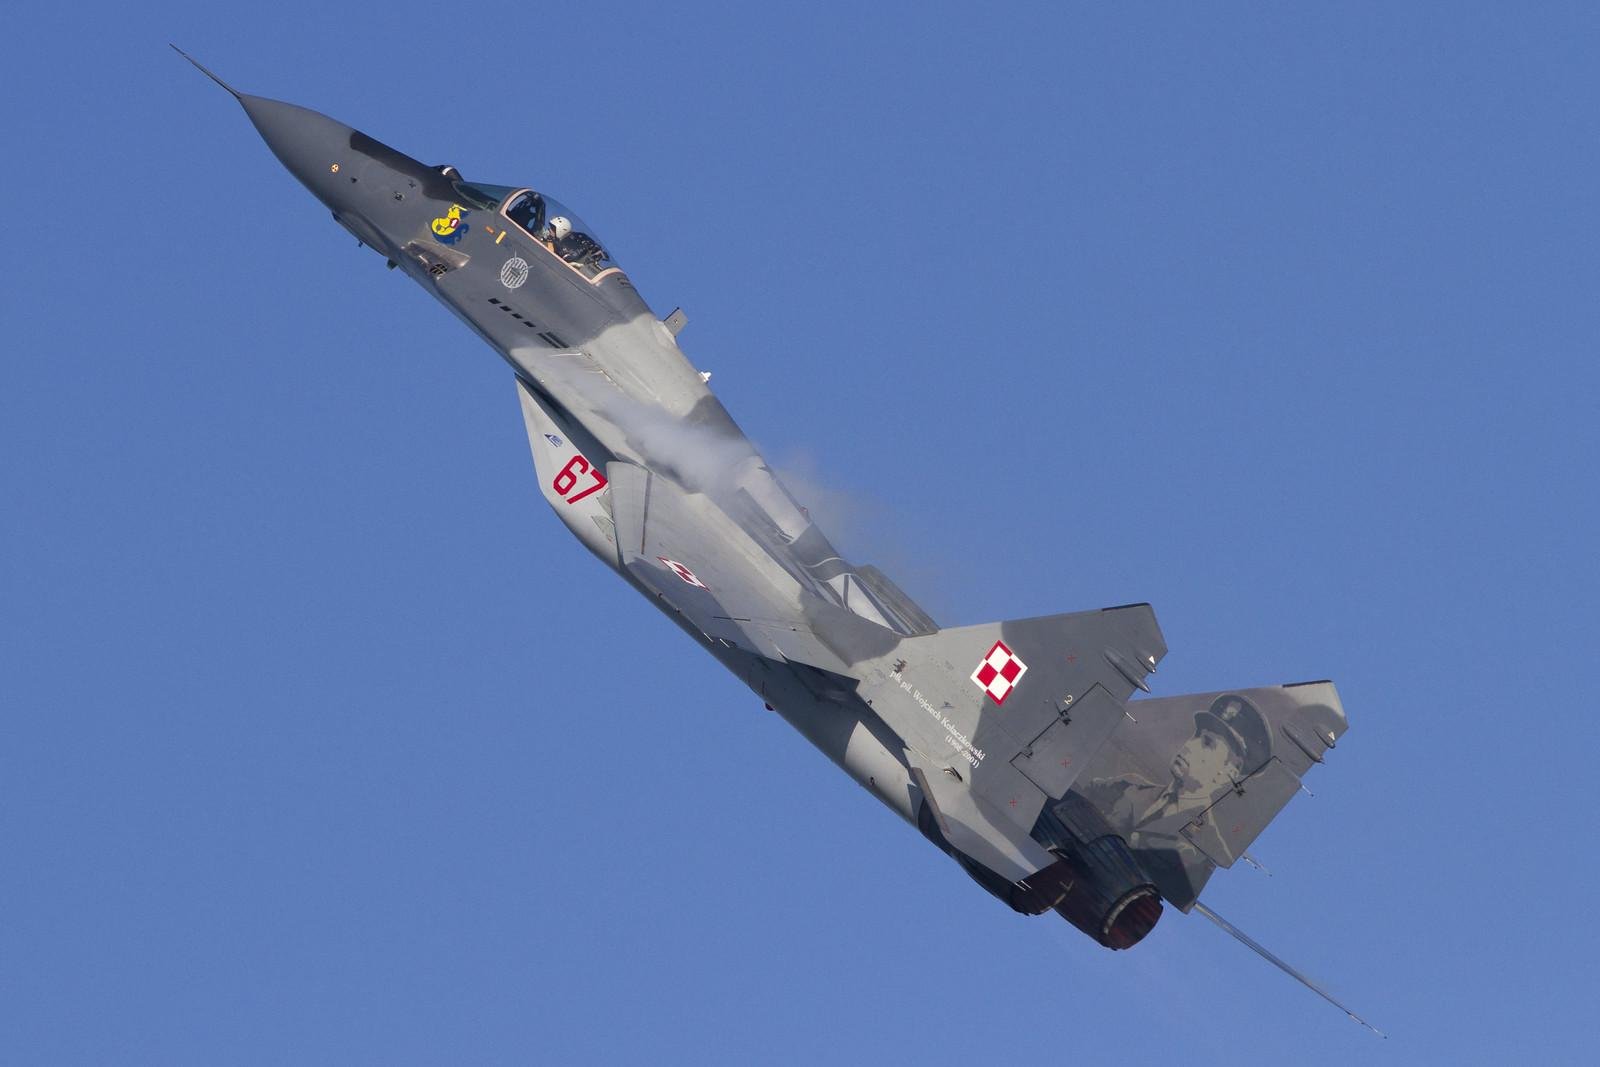 Poland continues to use the MiG-29 for air defense along with its Lockheed Martin F-16s.